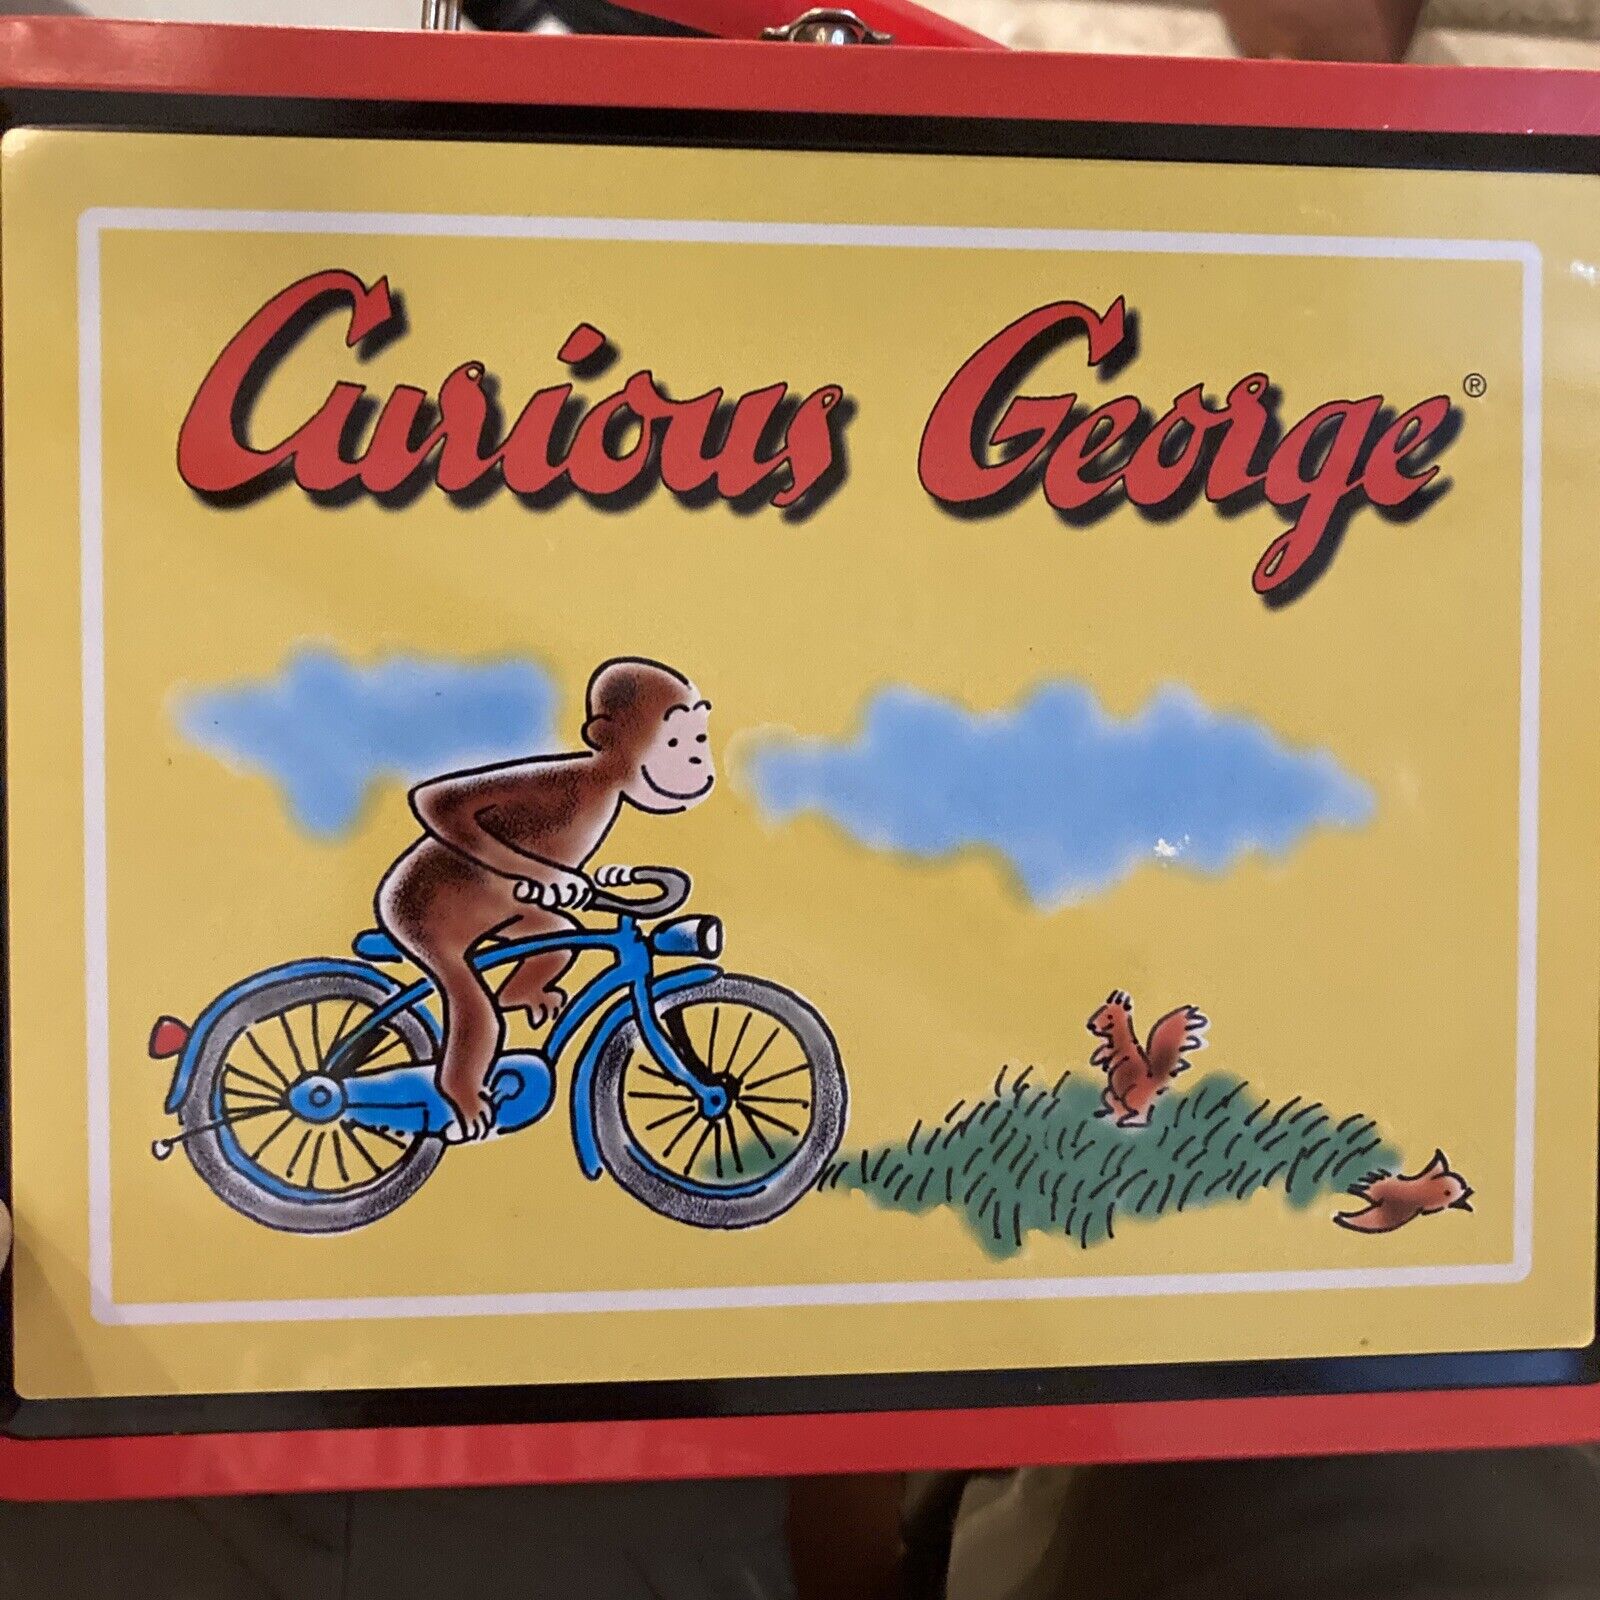 Vintage 1998 Curious George Metal Lunchbox Universal Studios Tin Container Box